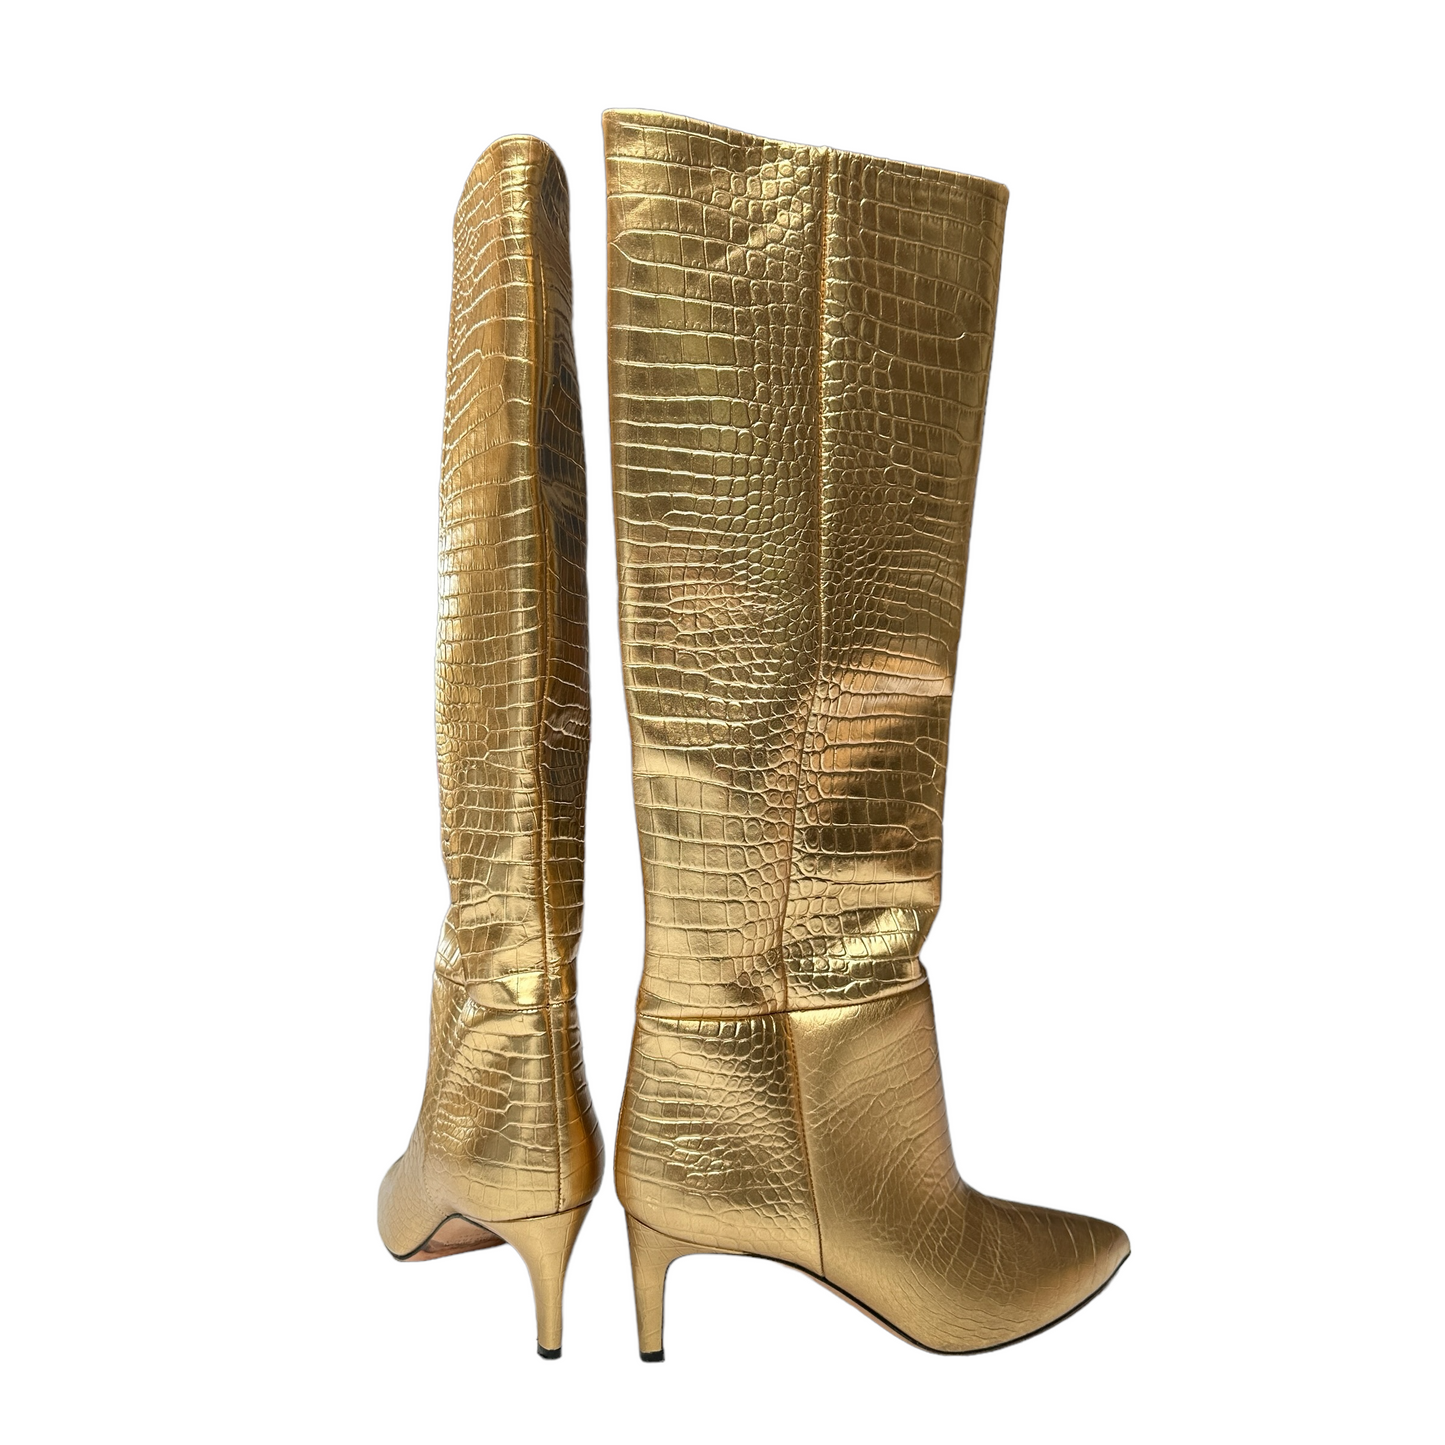 Gold Embossed Leather Boots - 7.5